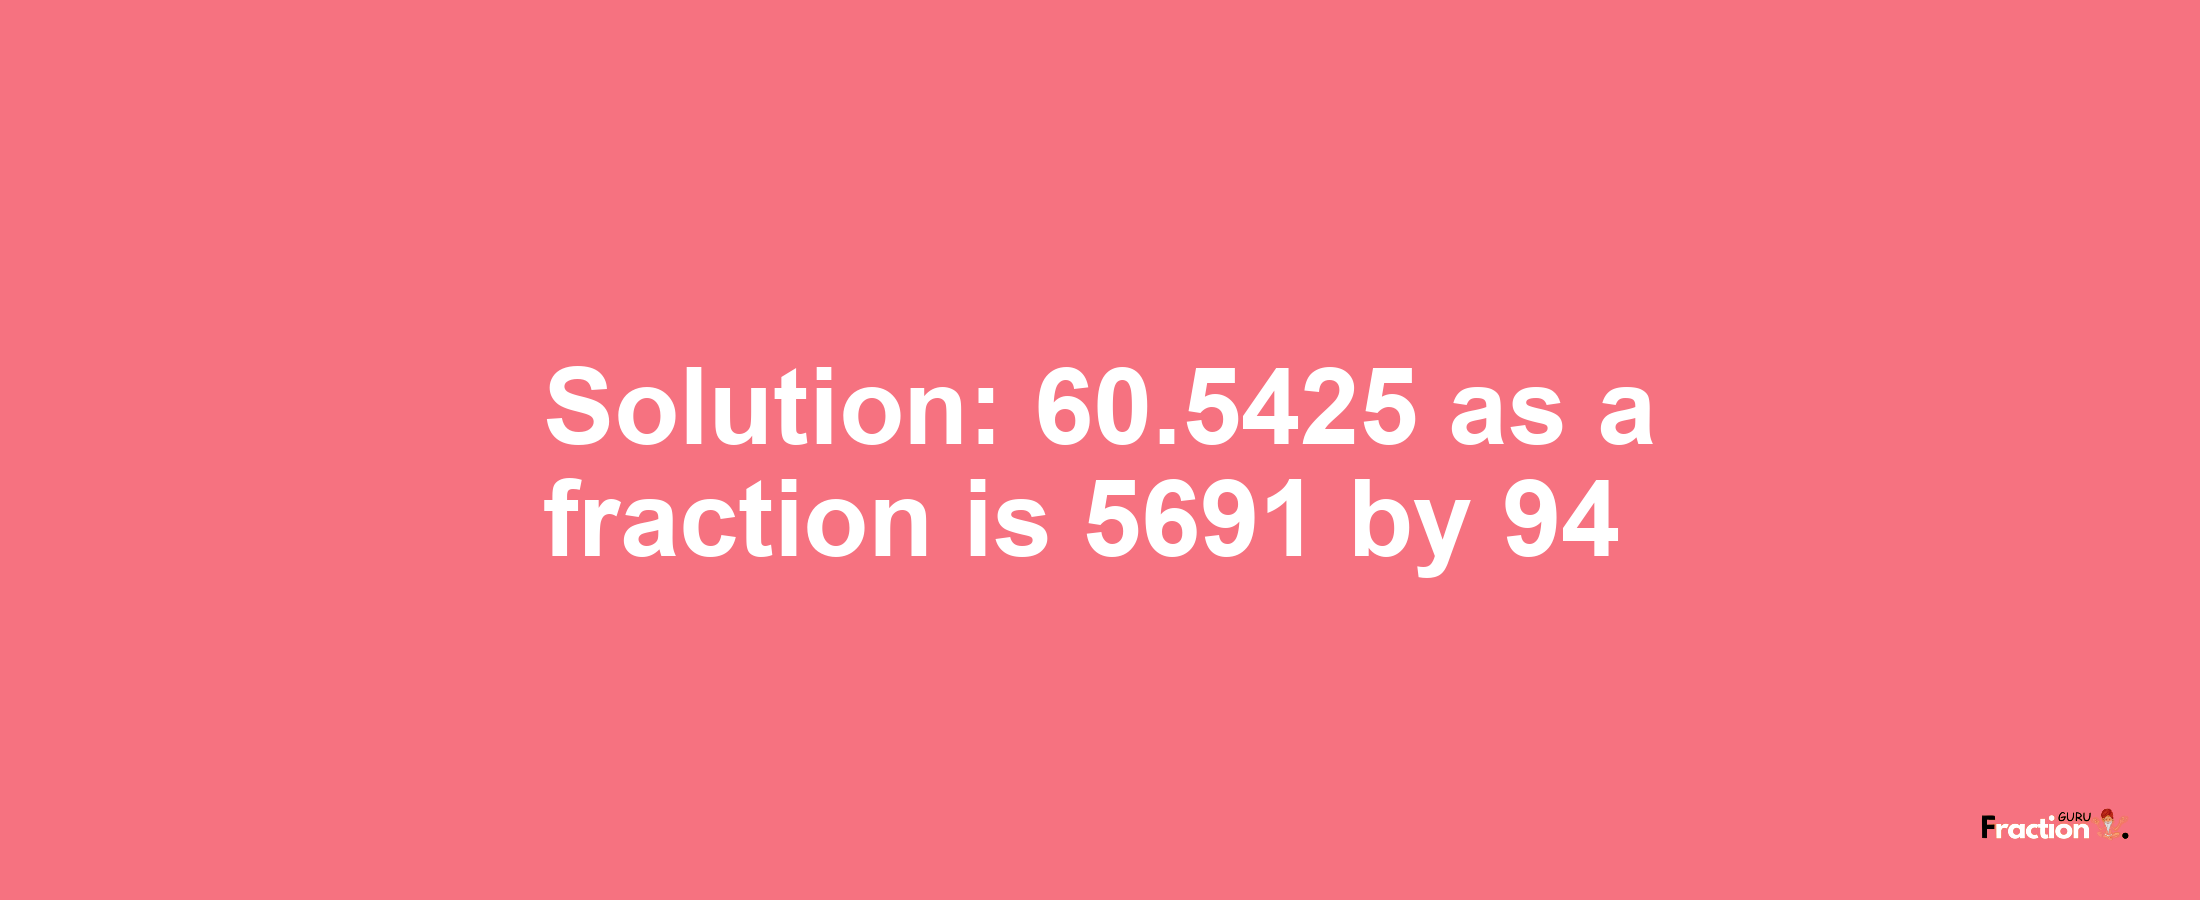 Solution:60.5425 as a fraction is 5691/94